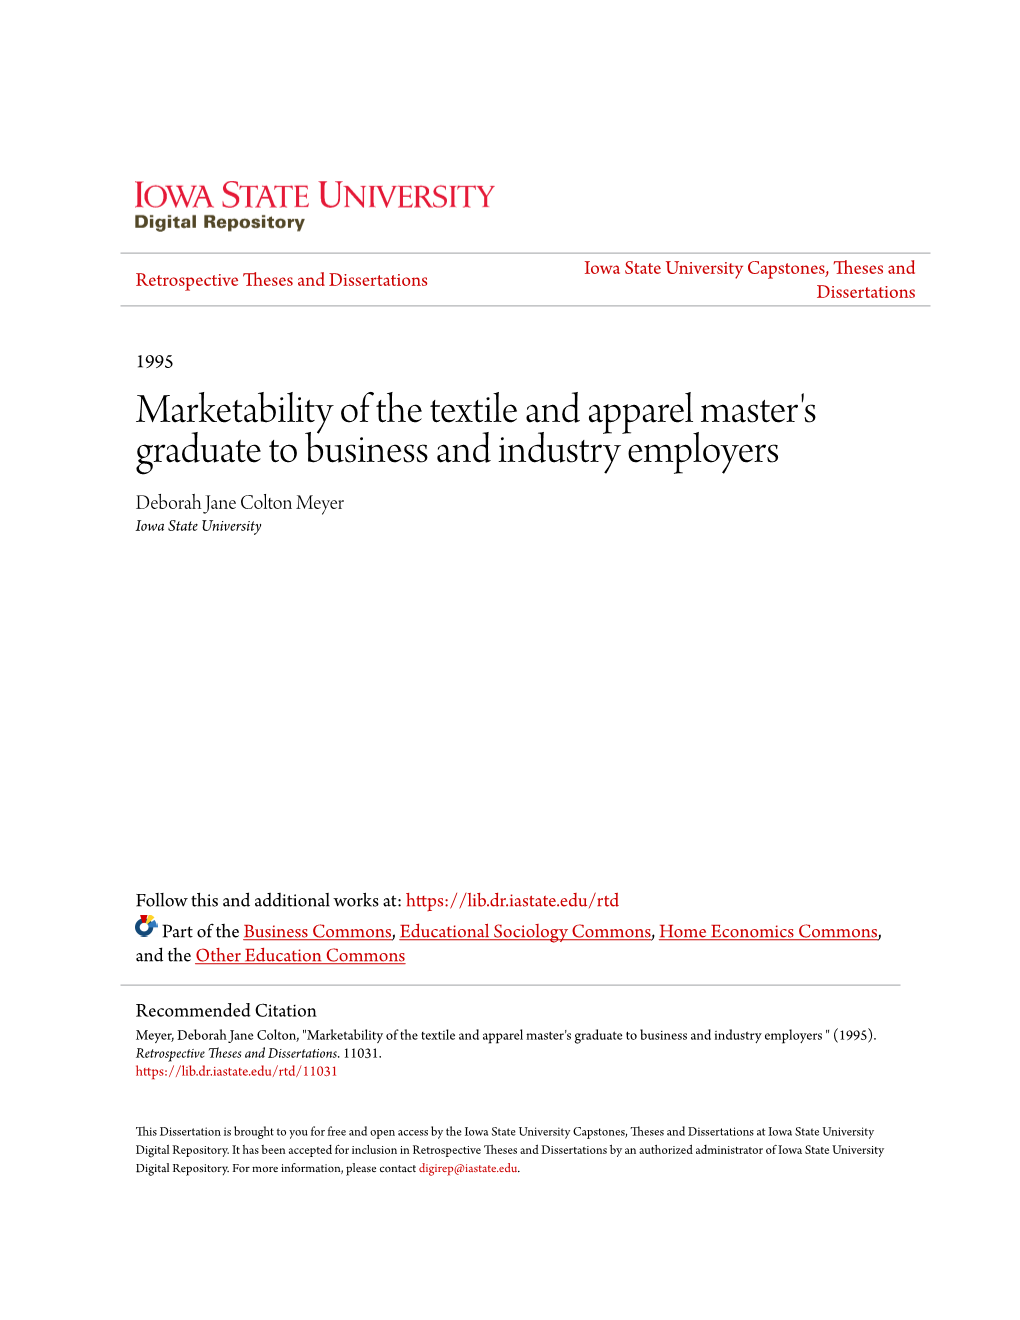 Marketability of the Textile and Apparel Master's Graduate to Business and Industry Employers Deborah Jane Colton Meyer Iowa State University